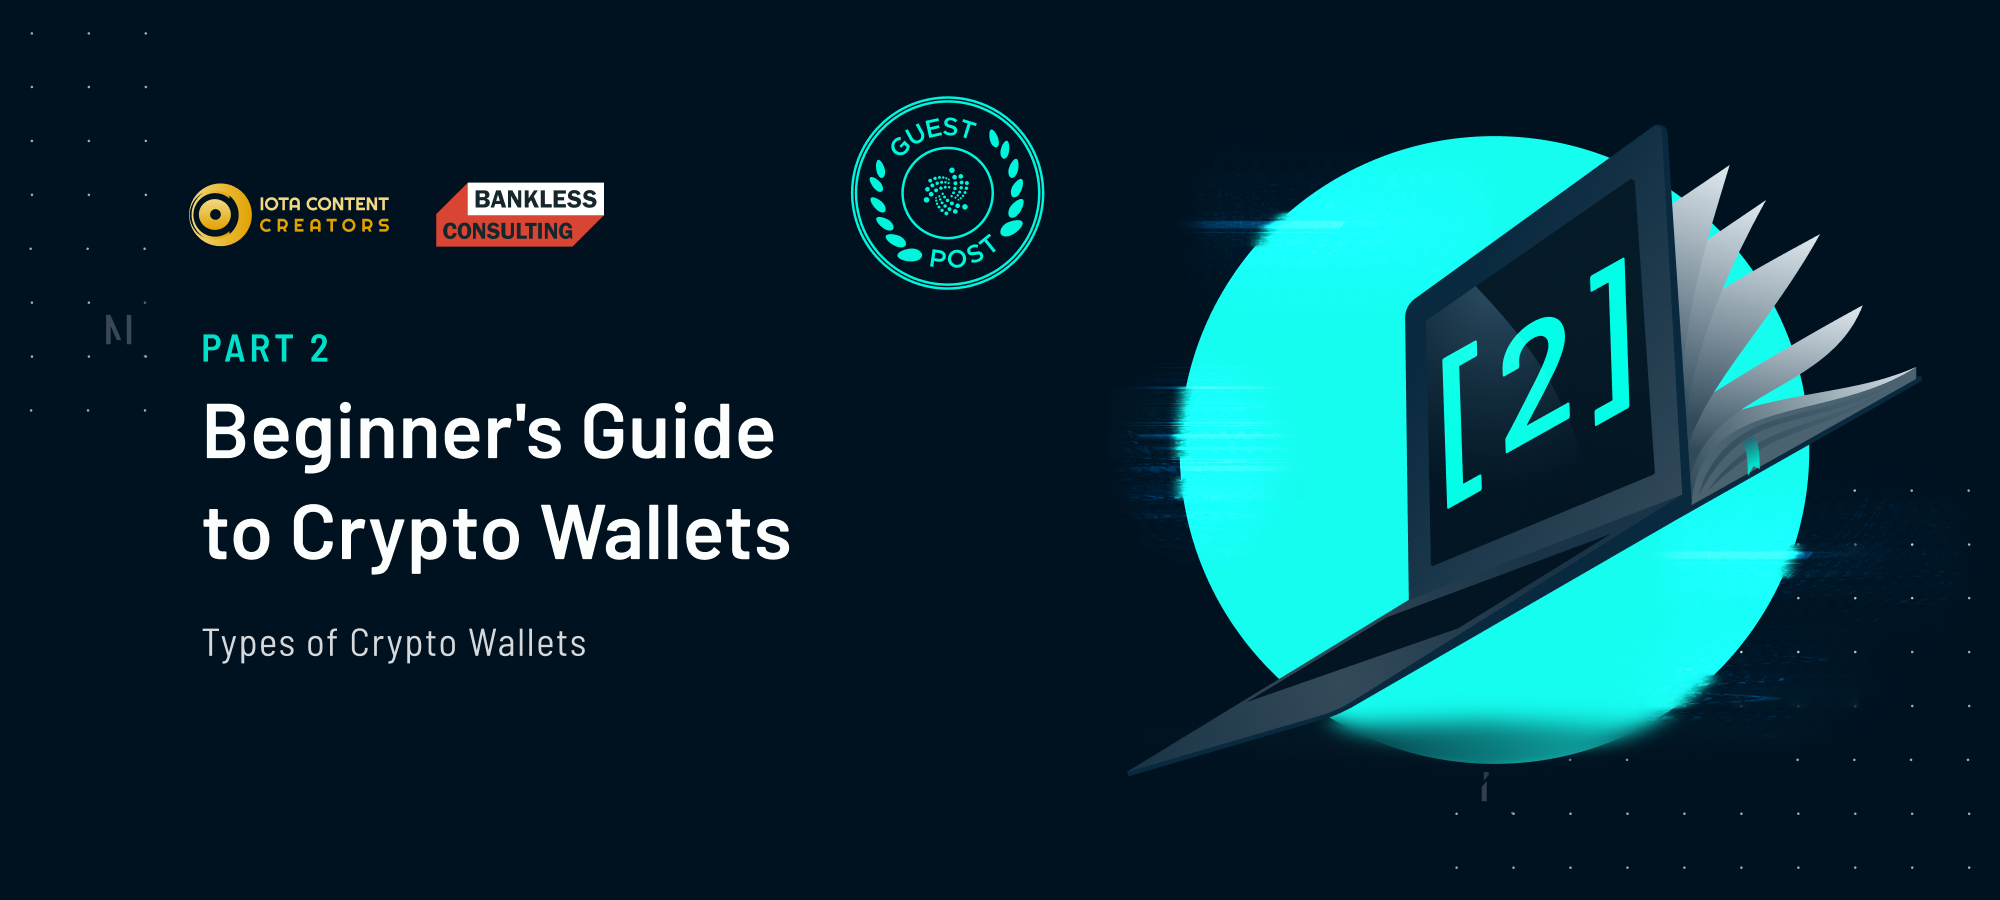 Beginner&apos;s Guide to Crypto Wallets: Part 2